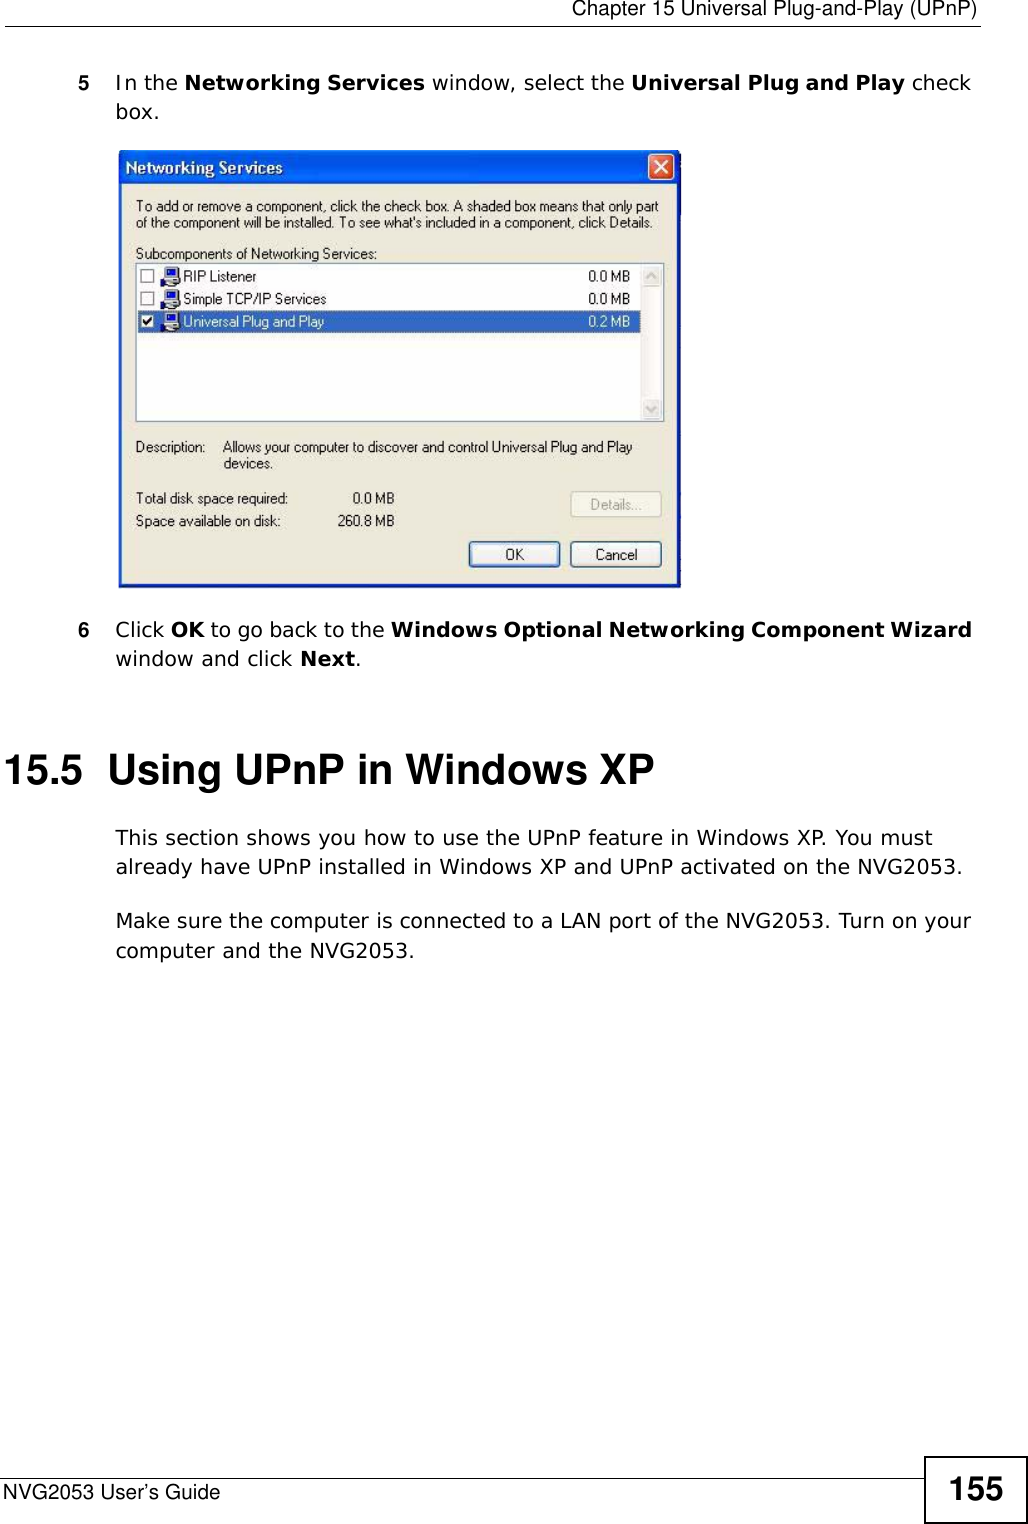  Chapter 15 Universal Plug-and-Play (UPnP)NVG2053 User’s Guide 1555In the Networking Services window, select the Universal Plug and Play check box. Networking Services6Click OK to go back to the Windows Optional Networking Component Wizard window and click Next. 15.5  Using UPnP in Windows XPThis section shows you how to use the UPnP feature in Windows XP. You must already have UPnP installed in Windows XP and UPnP activated on the NVG2053.Make sure the computer is connected to a LAN port of the NVG2053. Turn on your computer and the NVG2053. 